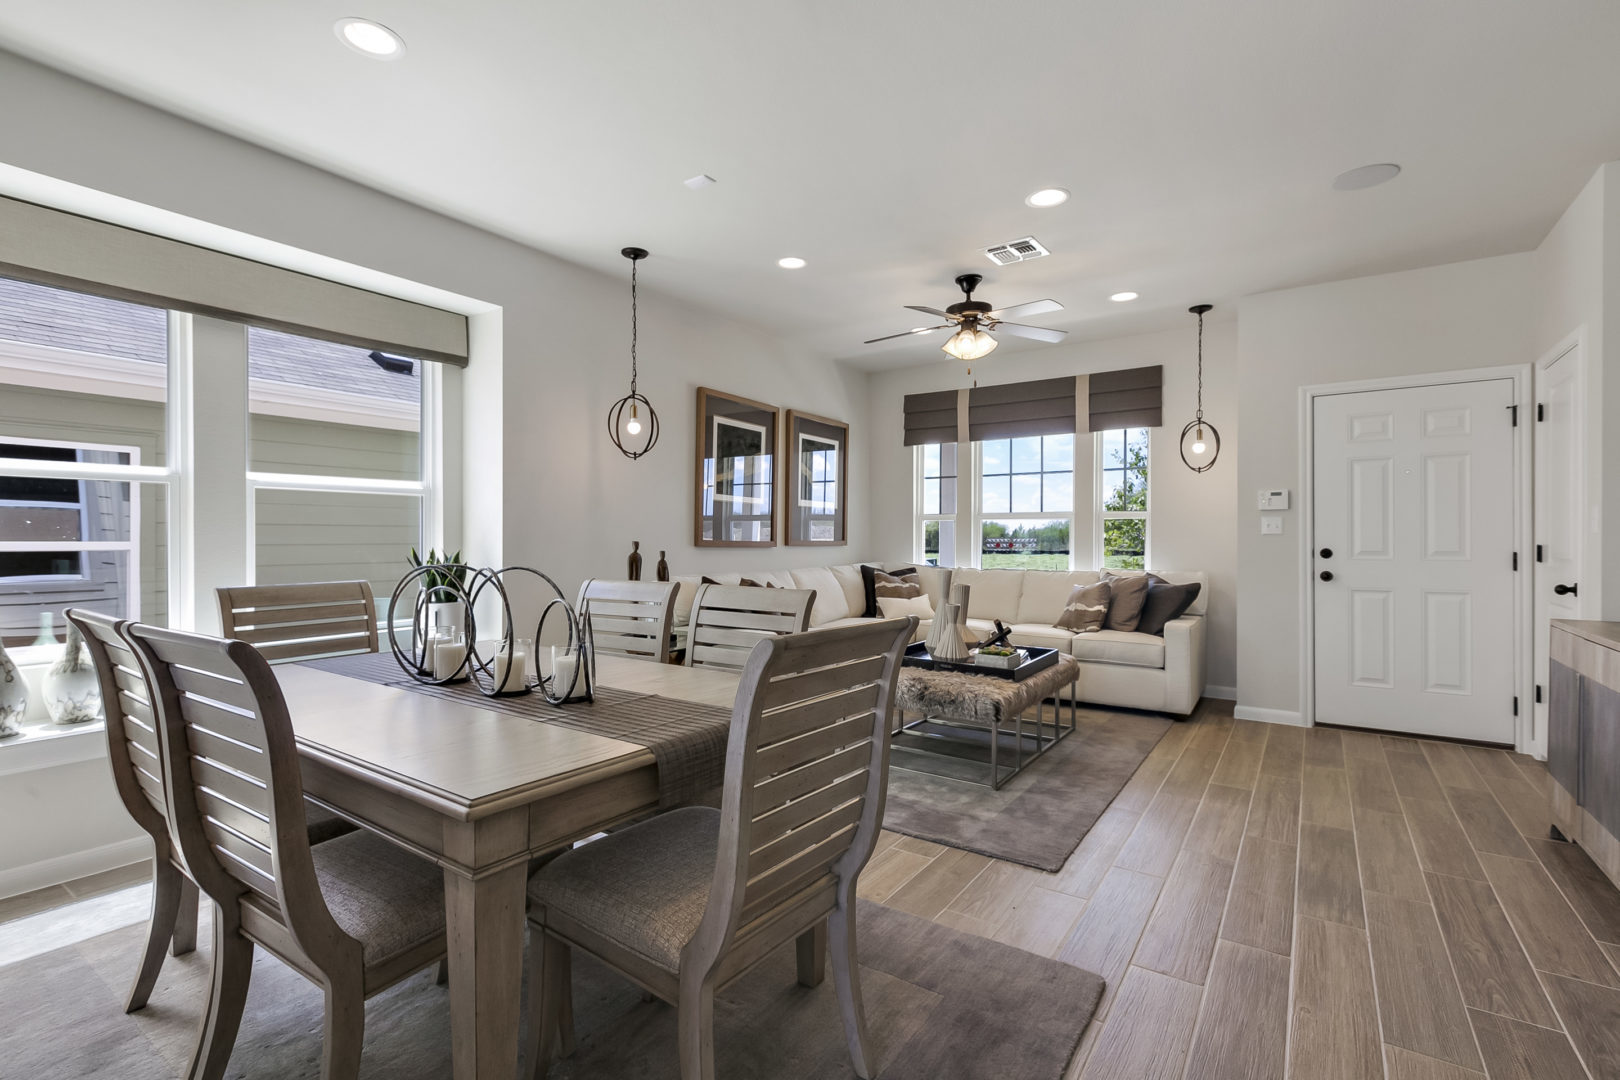 Trace Community Model Home Dining and Living Space